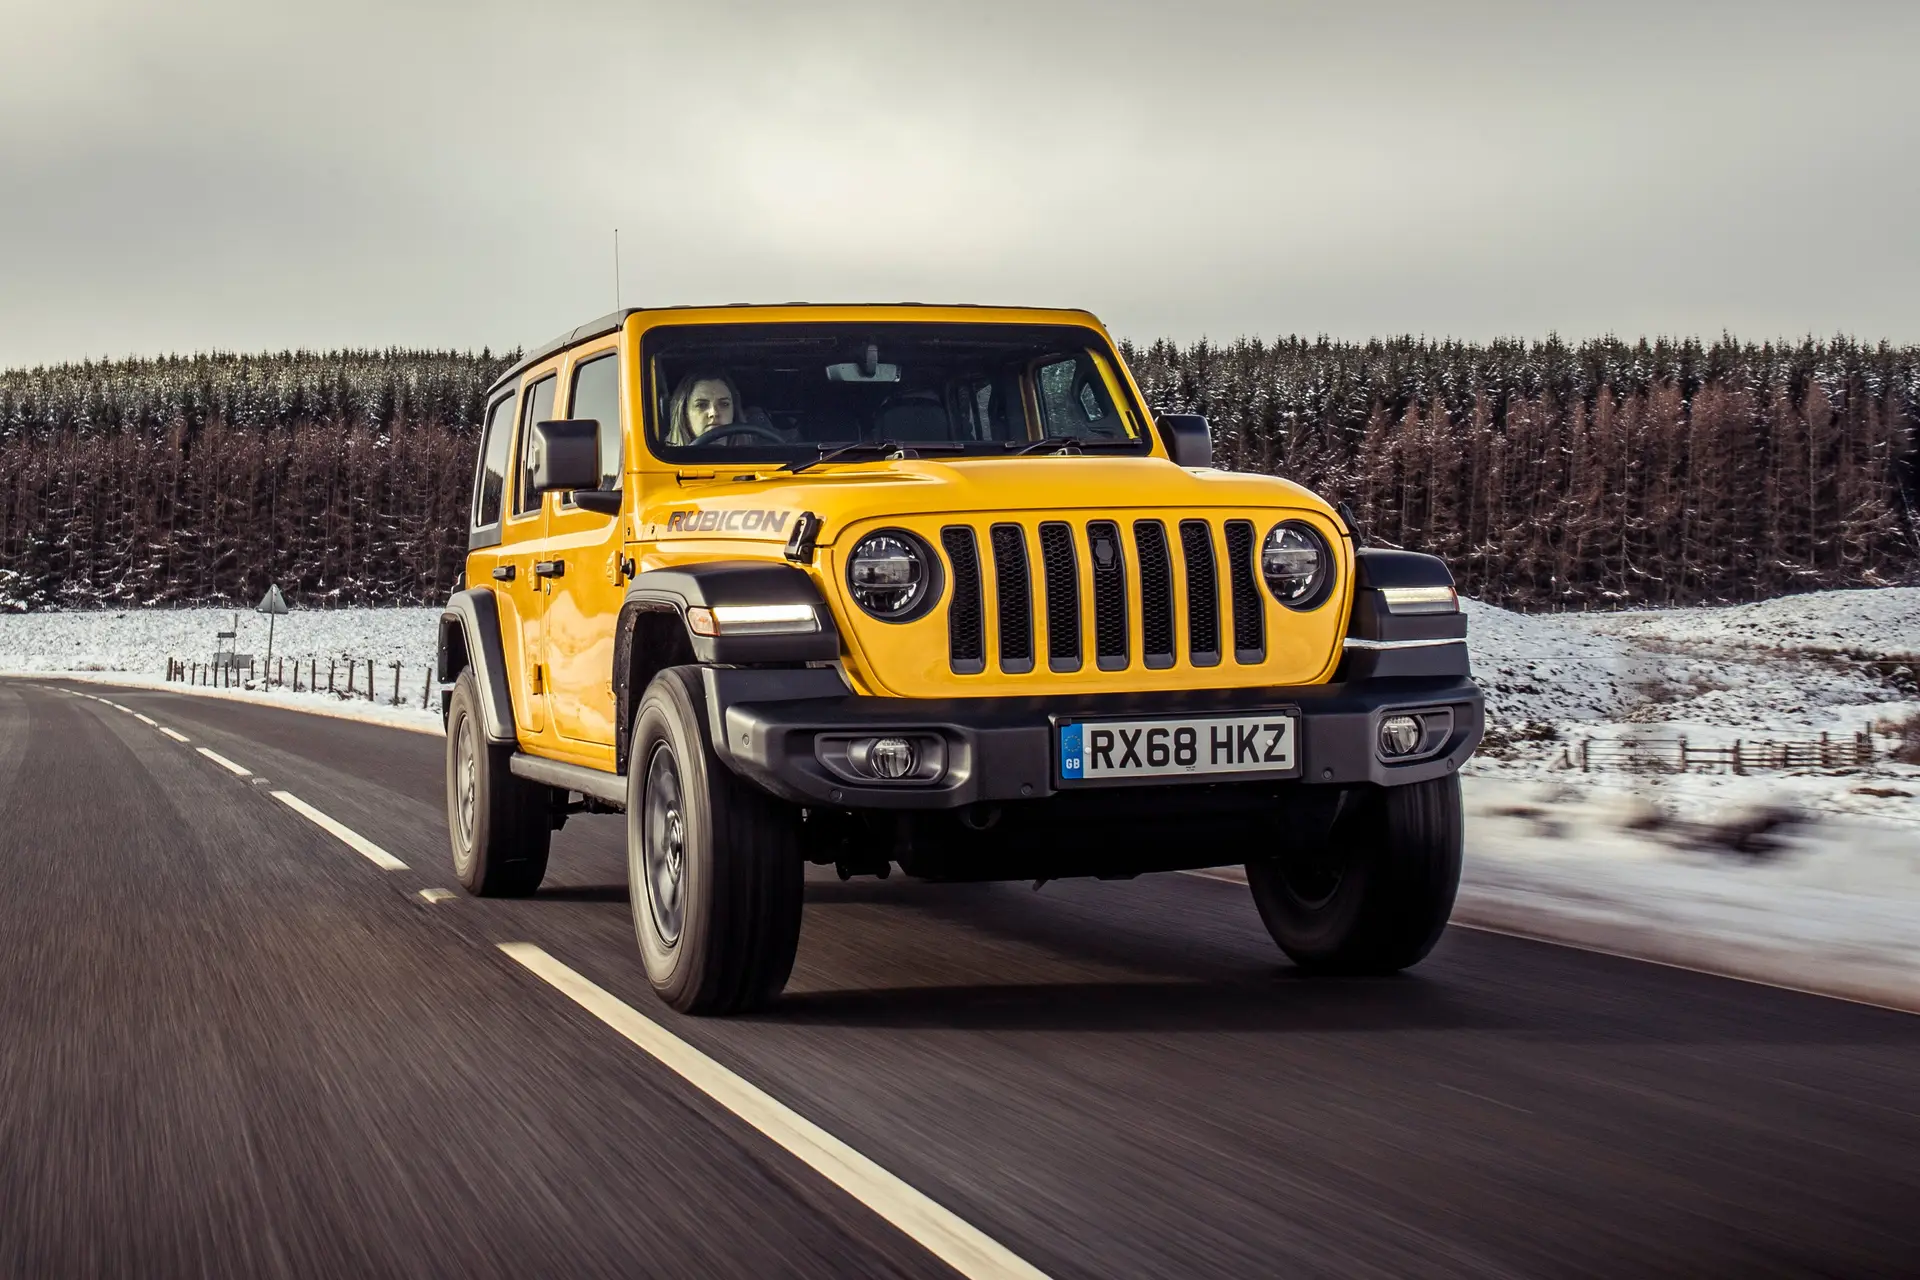 The 2021 Jeep Wrangler Has Some Changes up its Sleeve